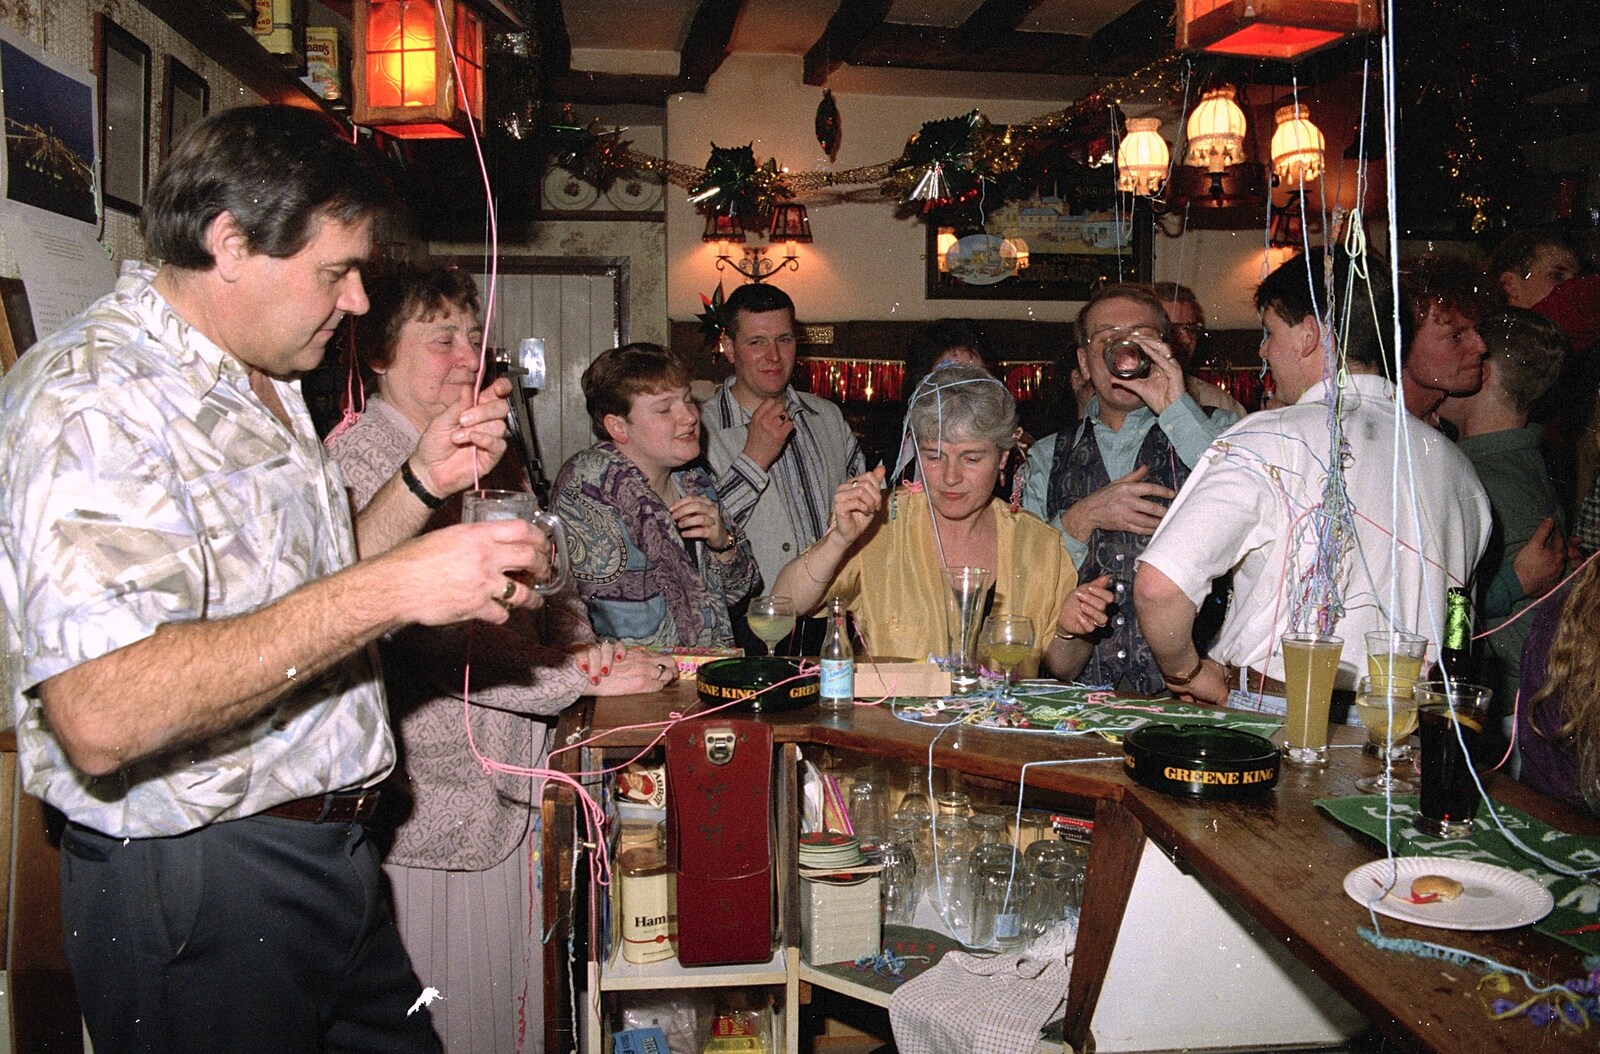 Party scene from behind the bar from New Year's Eve at the Swan Inn, Brome, Suffolk - 31st December 1994